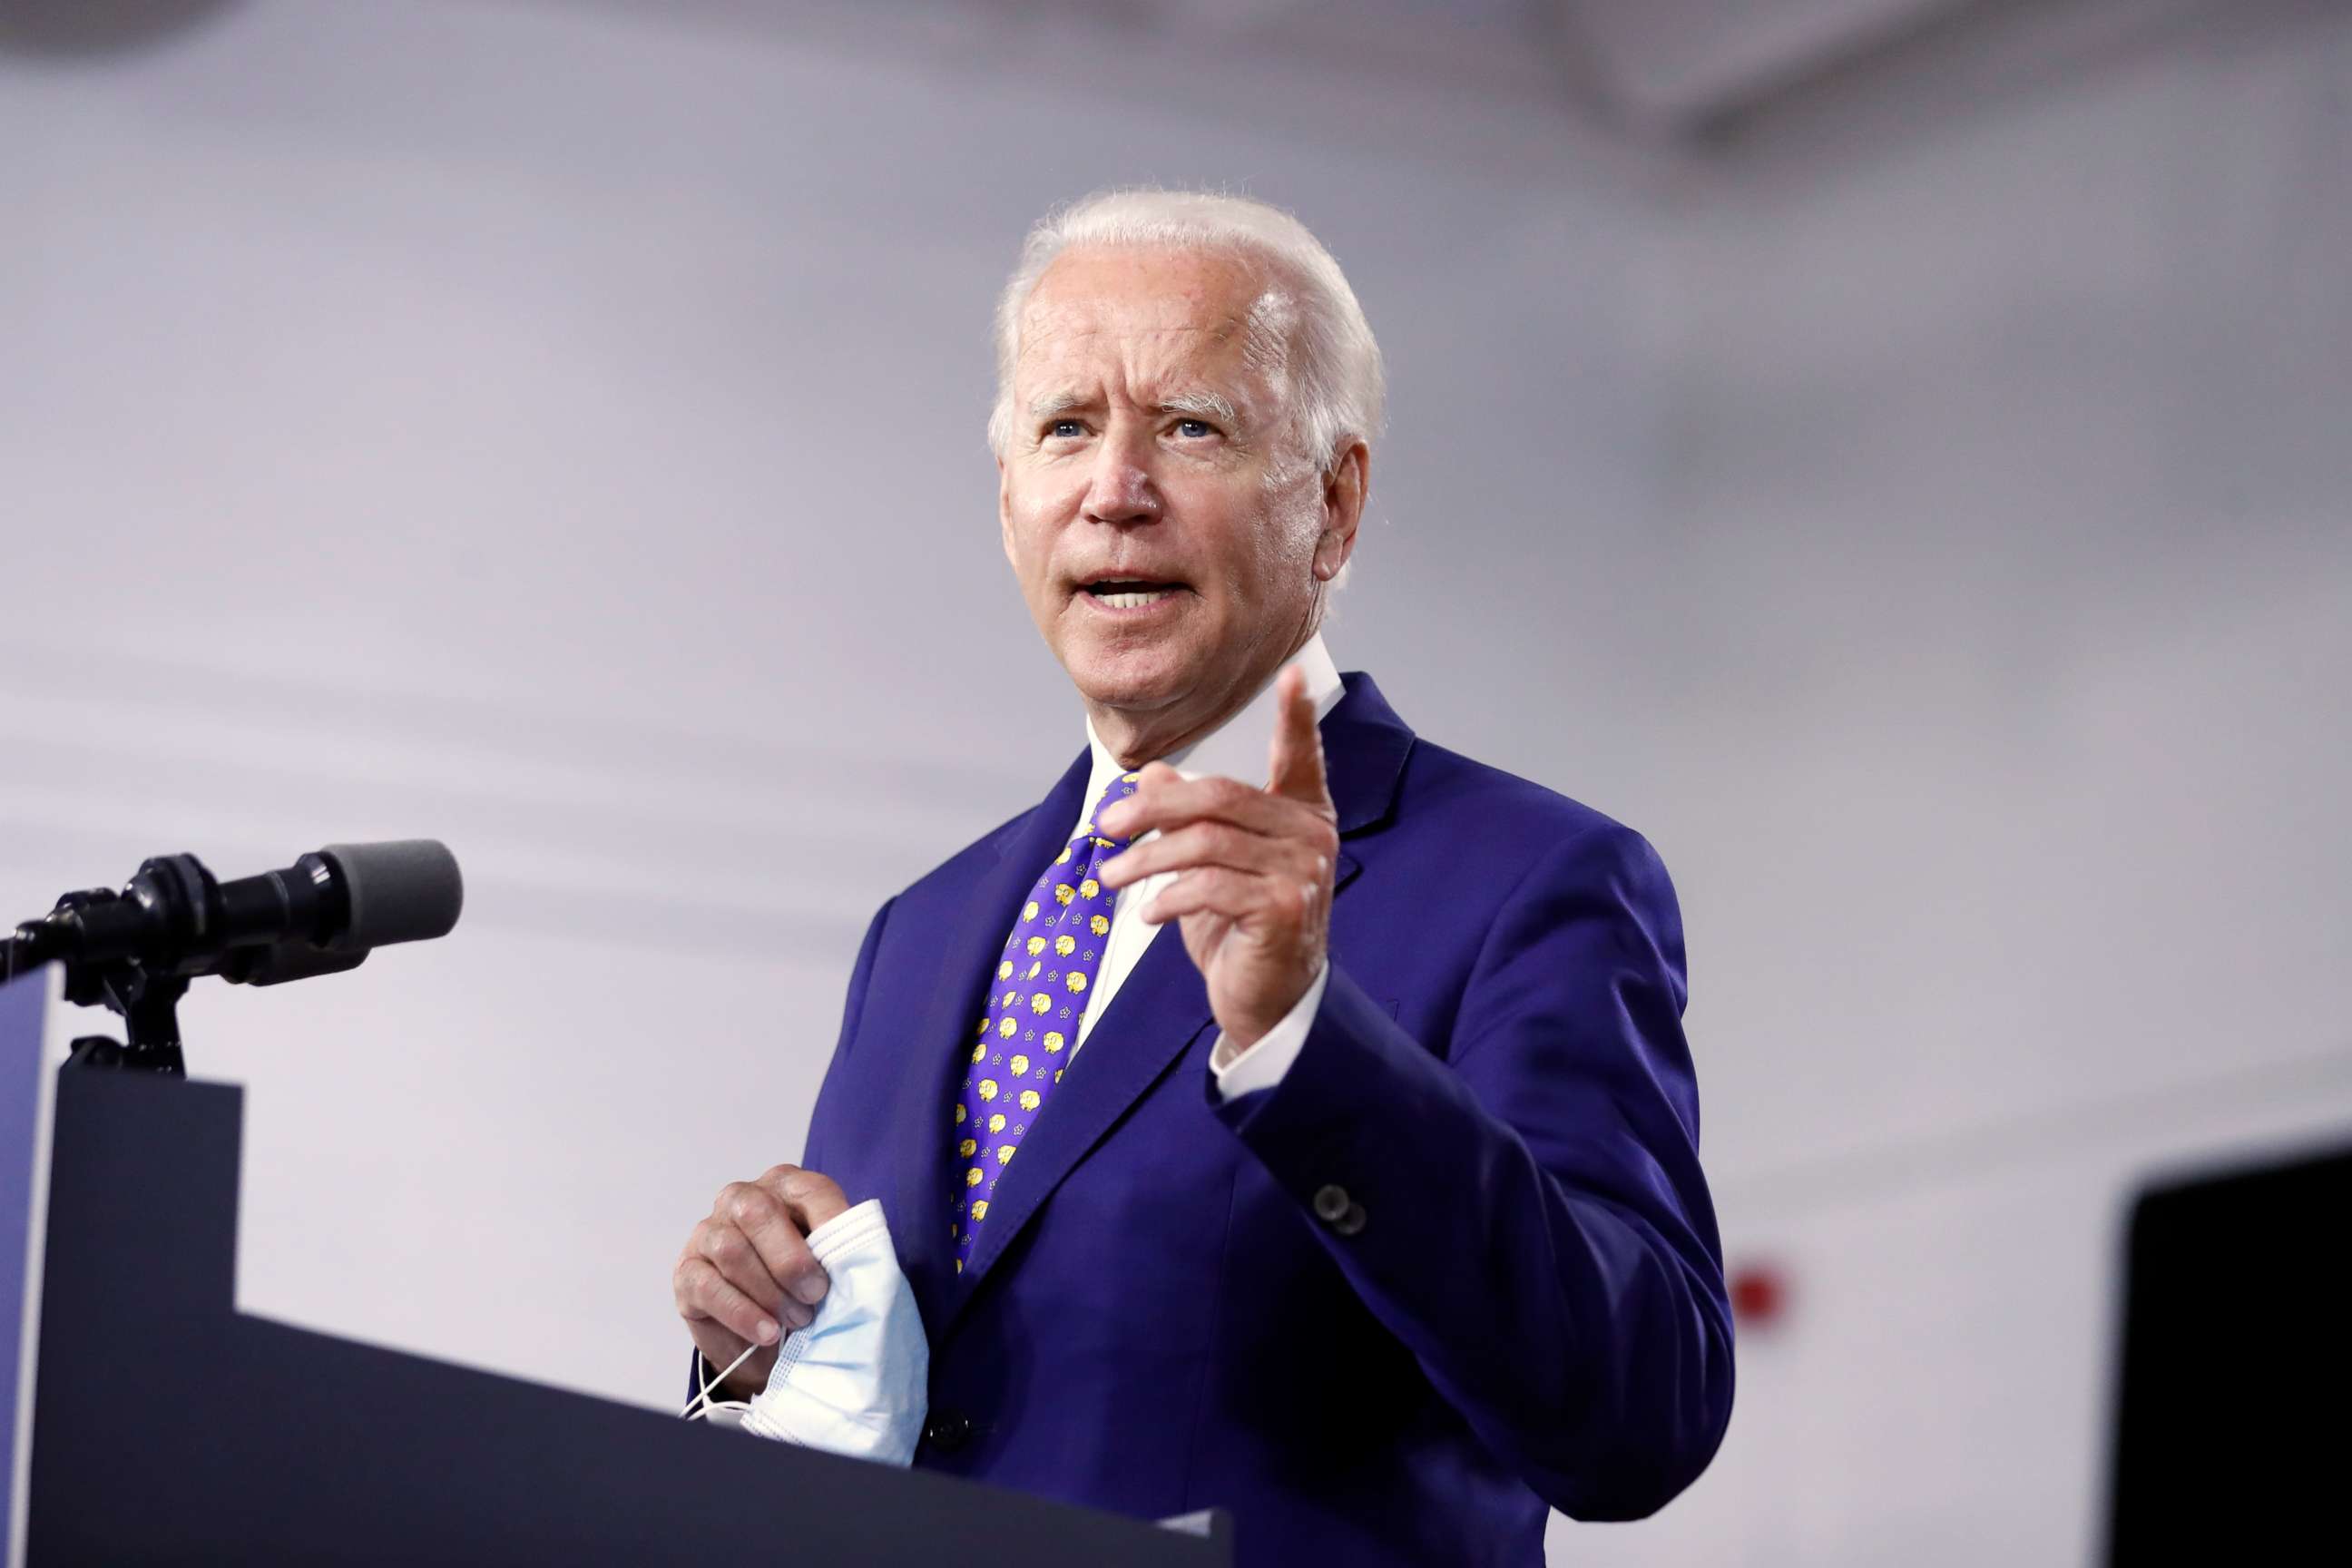 PHOTO: Joe Biden speaks at a campaign event at the William "Hicks" Anderson Community Center in Wilmington, Del., July 28, 2020.